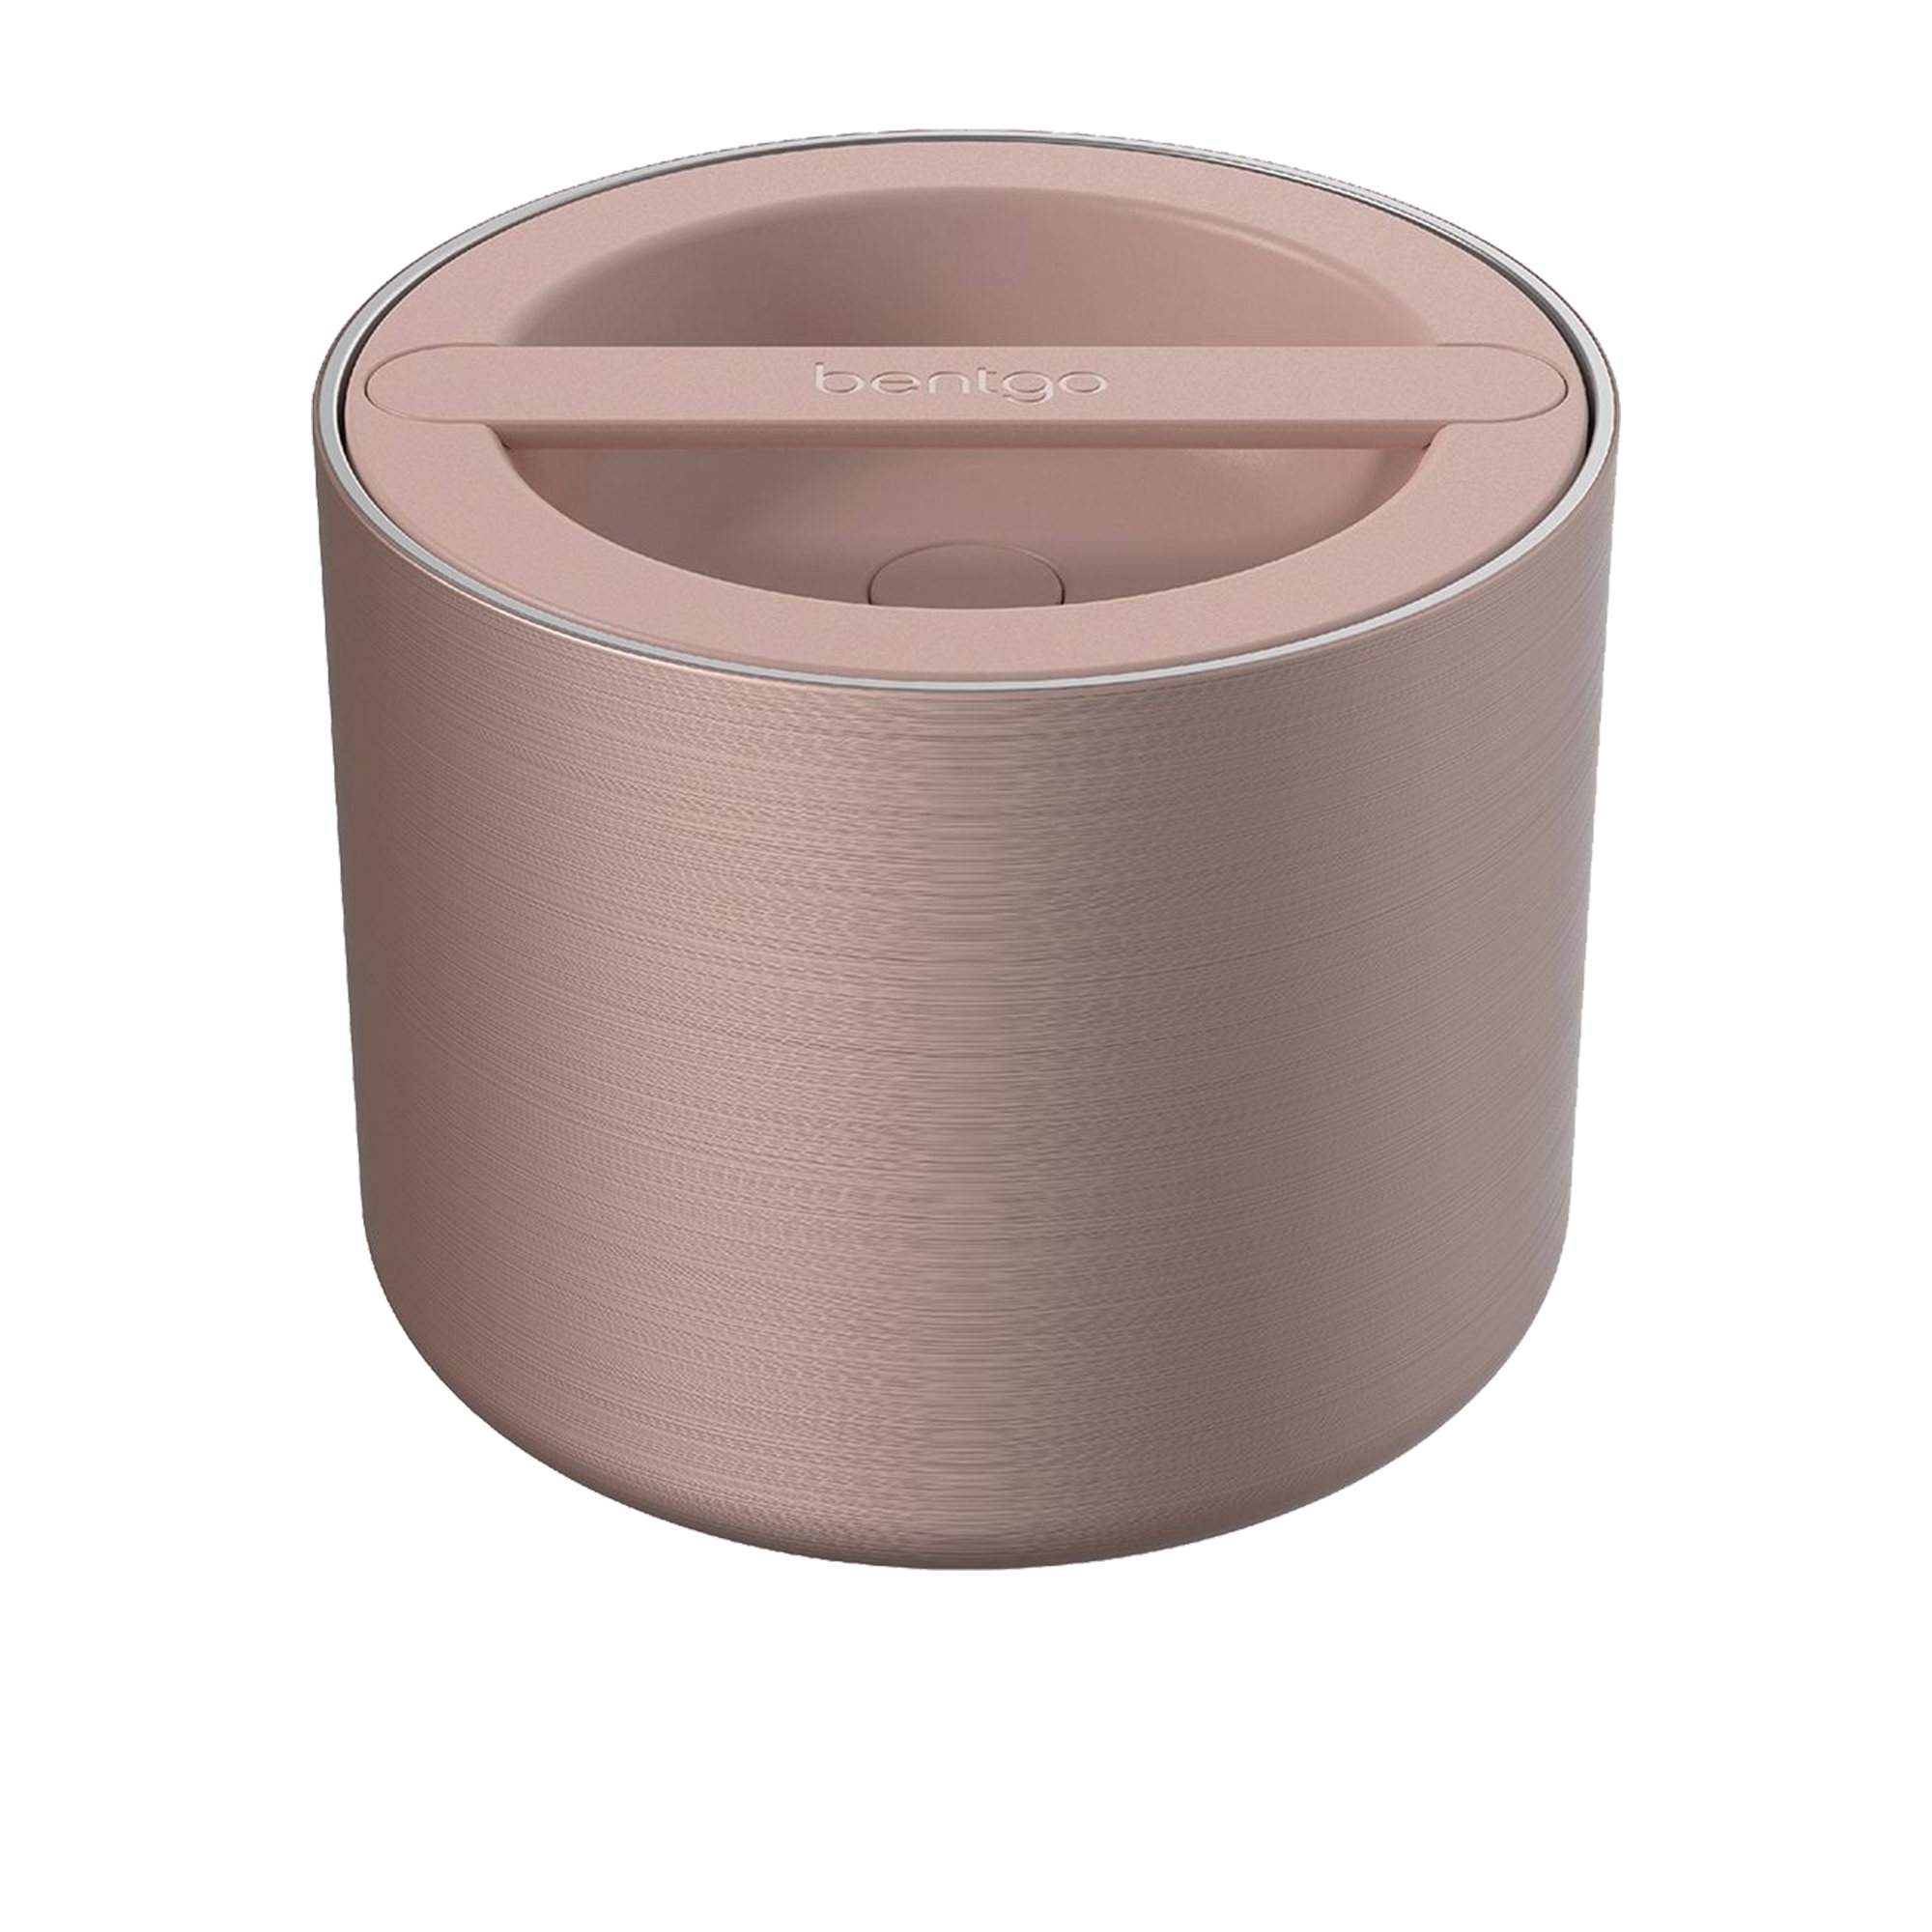 Bentgo Stainless Steel Insulated Food Container 560ml Rose Gold Image 1